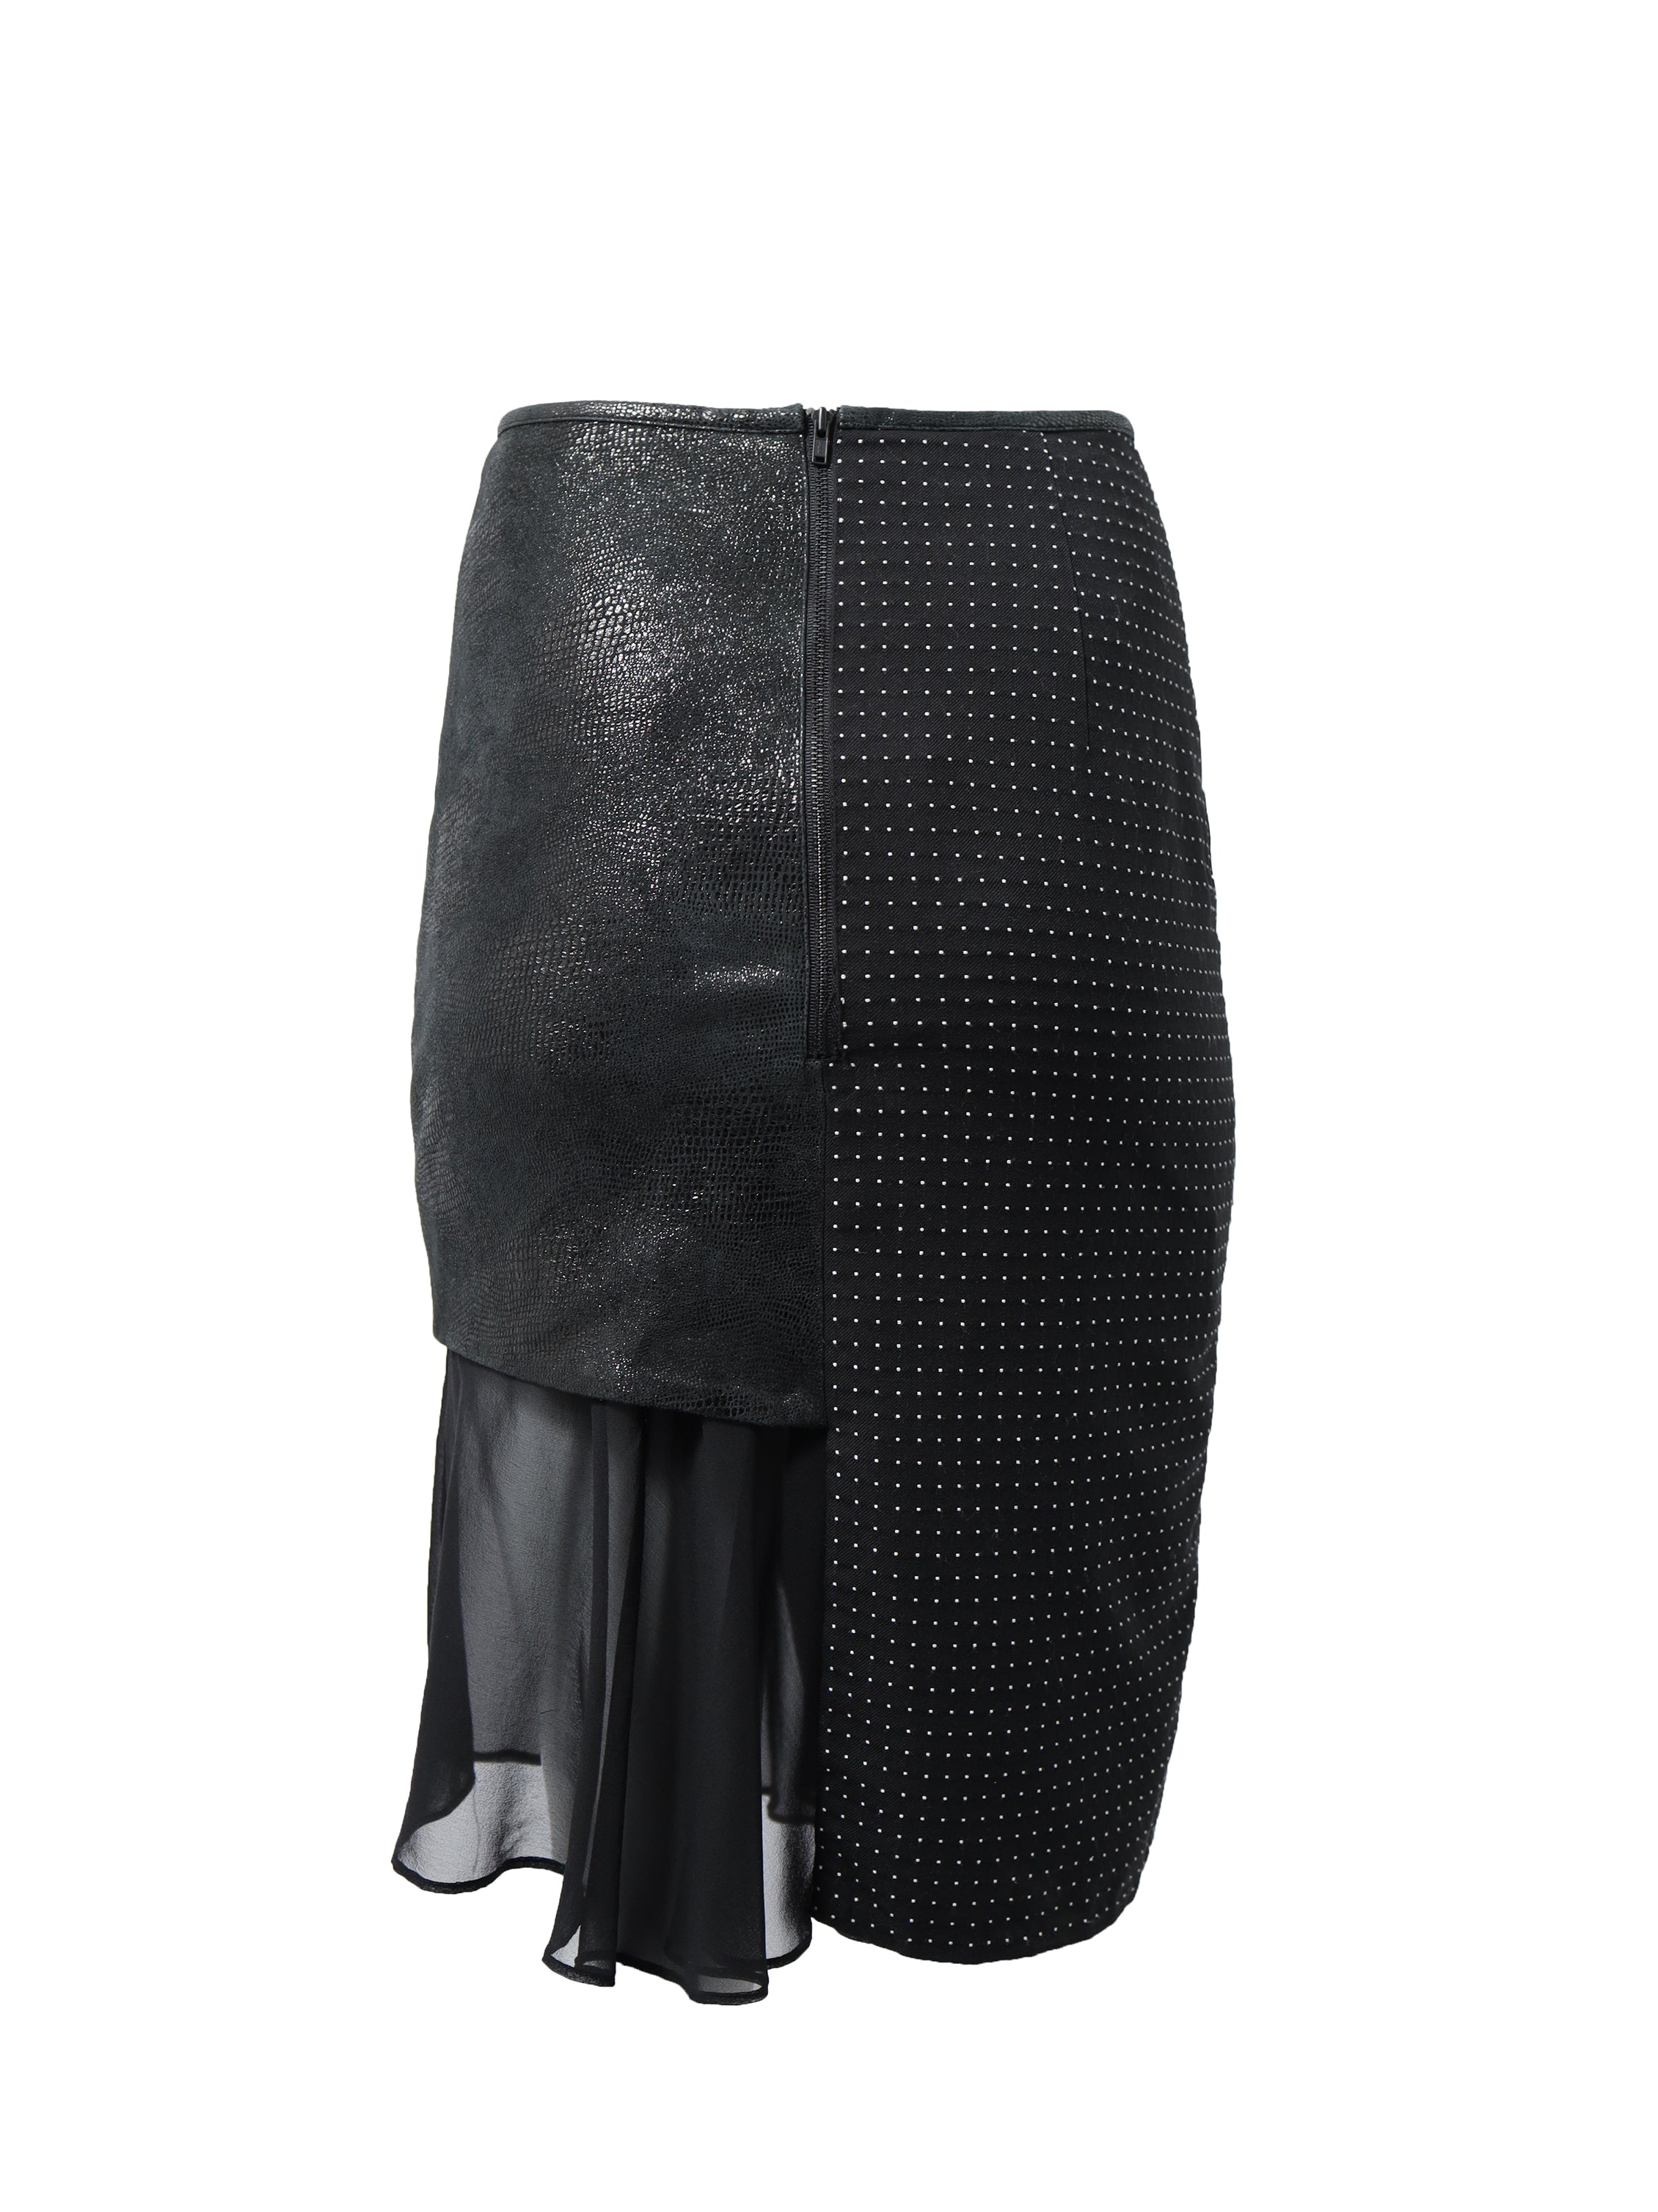 Stretch Leather Black Skirt With Polka Dot Detailing